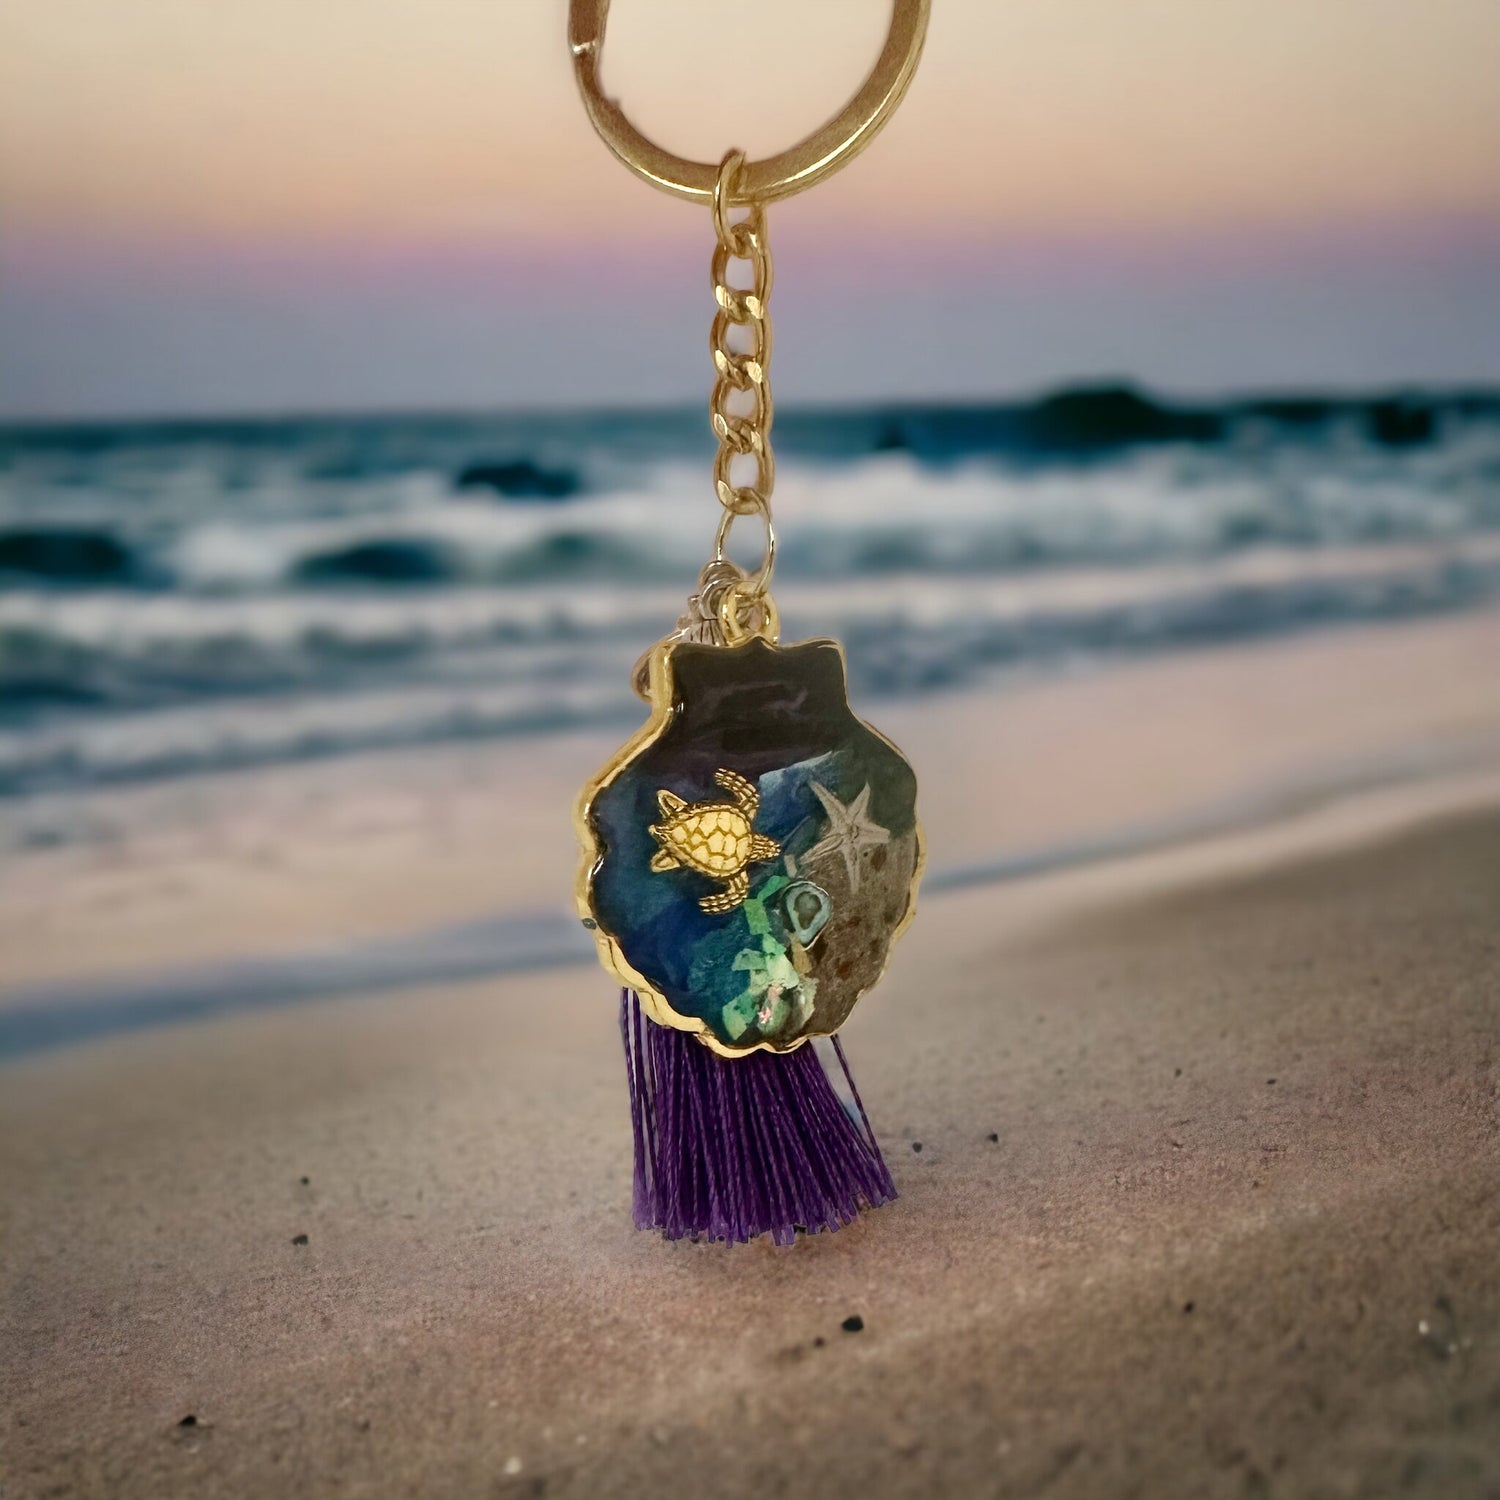 An ocean themed keychain created with resin and real seashells